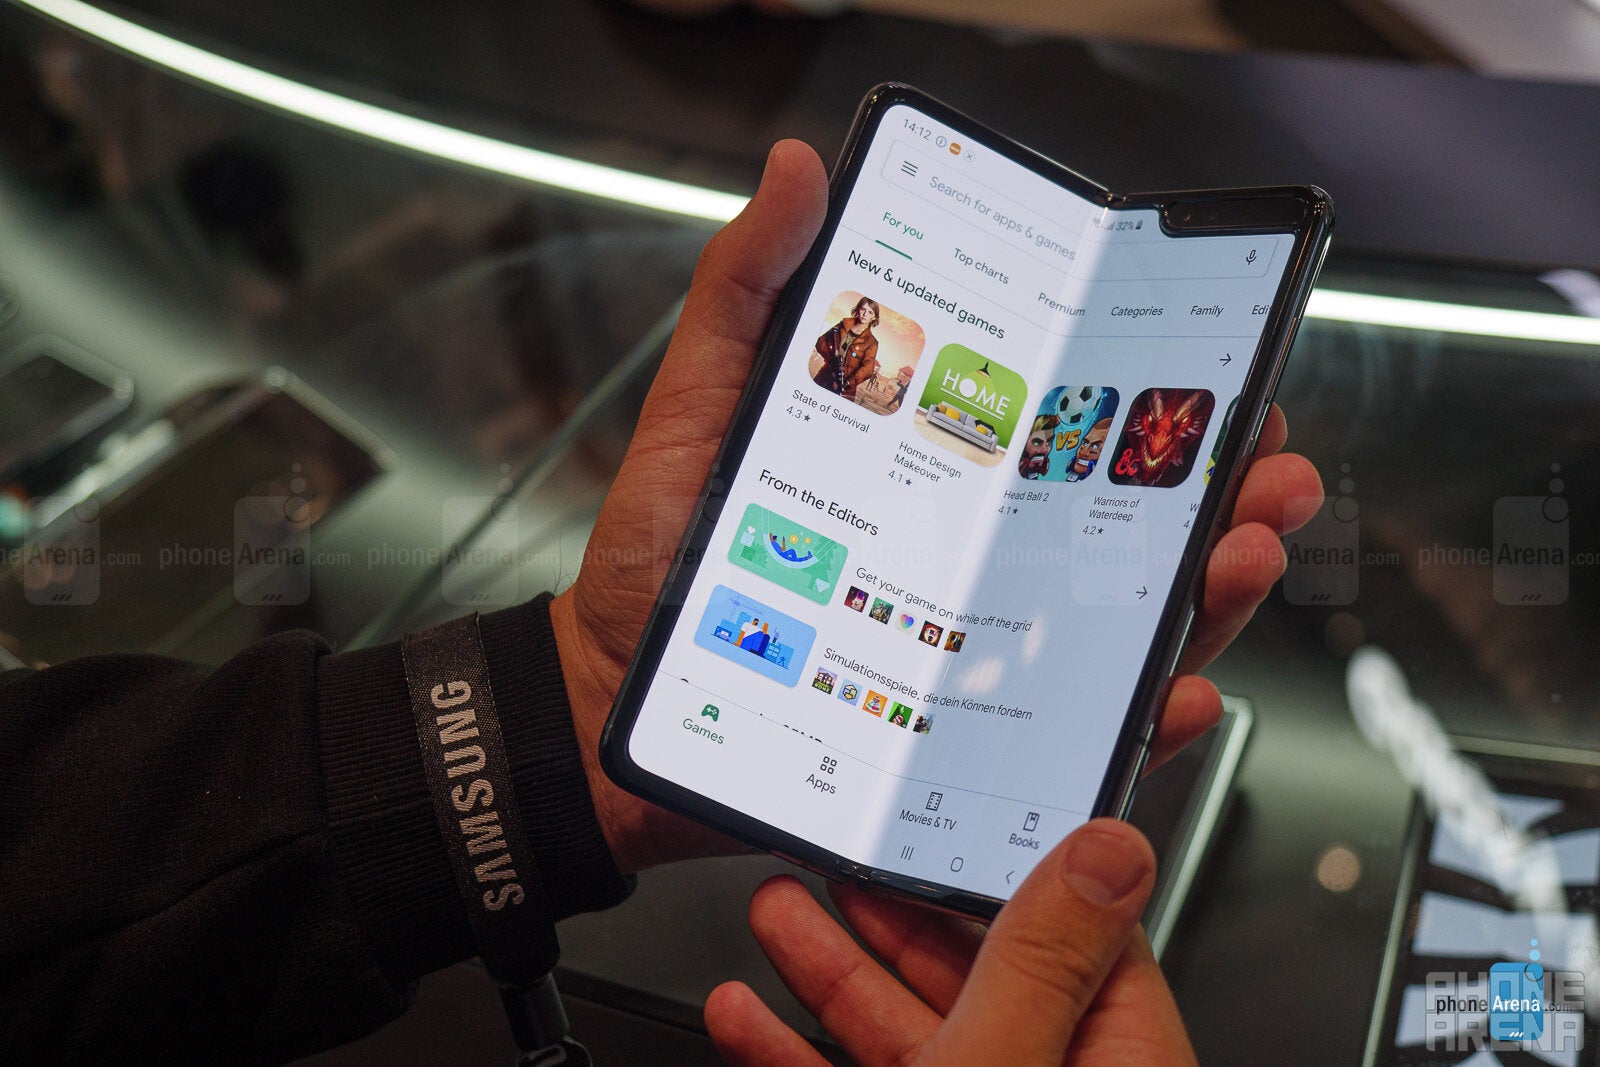 2019 was an amazing year for smartphones